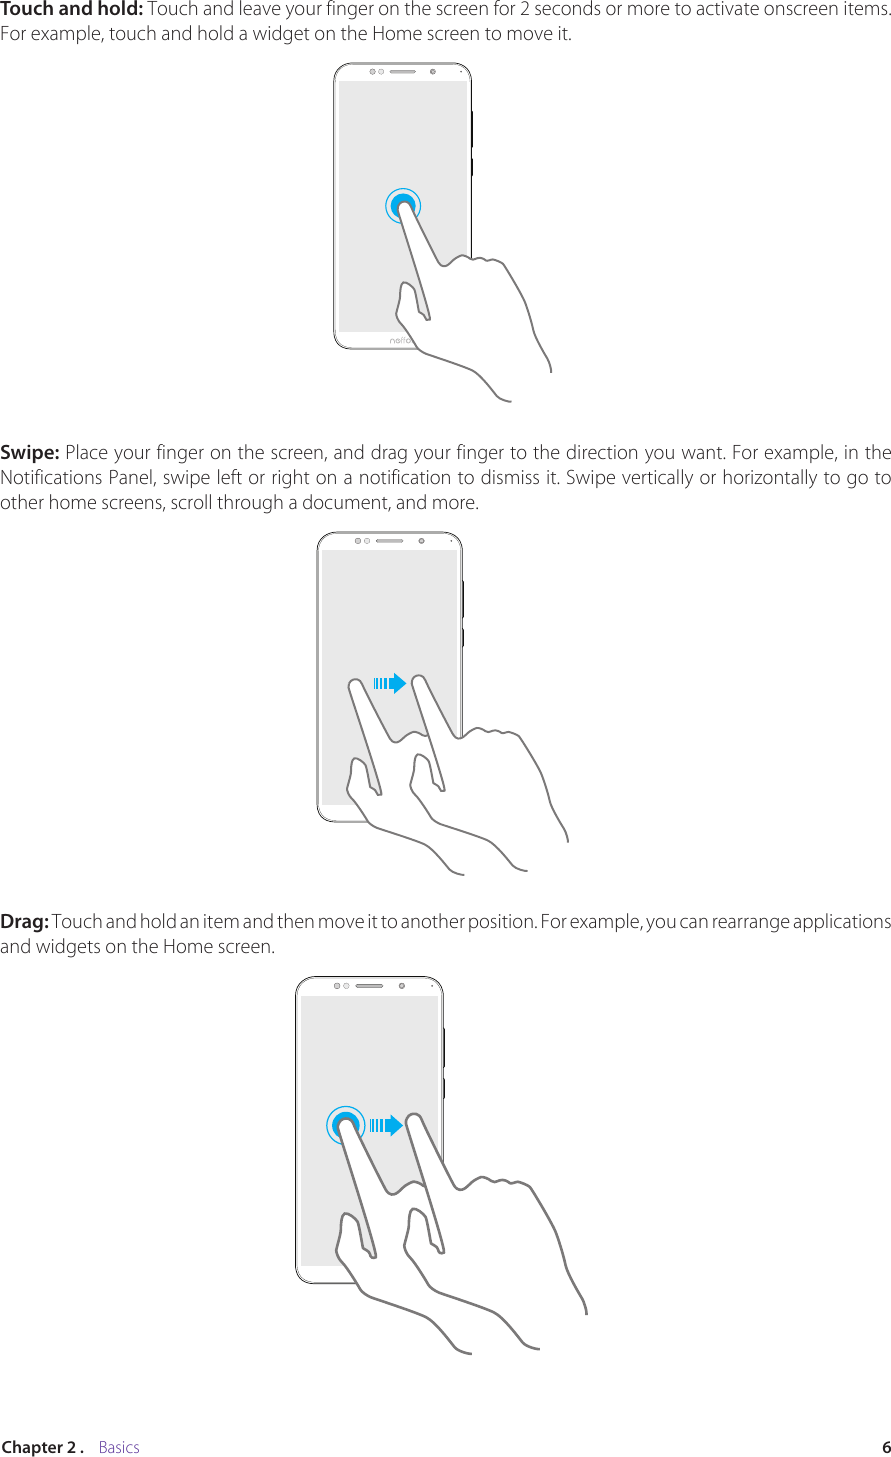 6Chapter 2 .    BasicsTouch and hold: Touch and leave your finger on the screen for 2 seconds or more to activate onscreen items. For example, touch and hold a widget on the Home screen to move it. Swipe: Place your finger on the screen, and drag your finger to the direction you want. For example, in the Notifications Panel, swipe left or right on a notification to dismiss it. Swipe vertically or horizontally to go to other home screens, scroll through a document, and more.Drag: Touch and hold an item and then move it to another position. For example, you can rearrange applications and widgets on the Home screen.